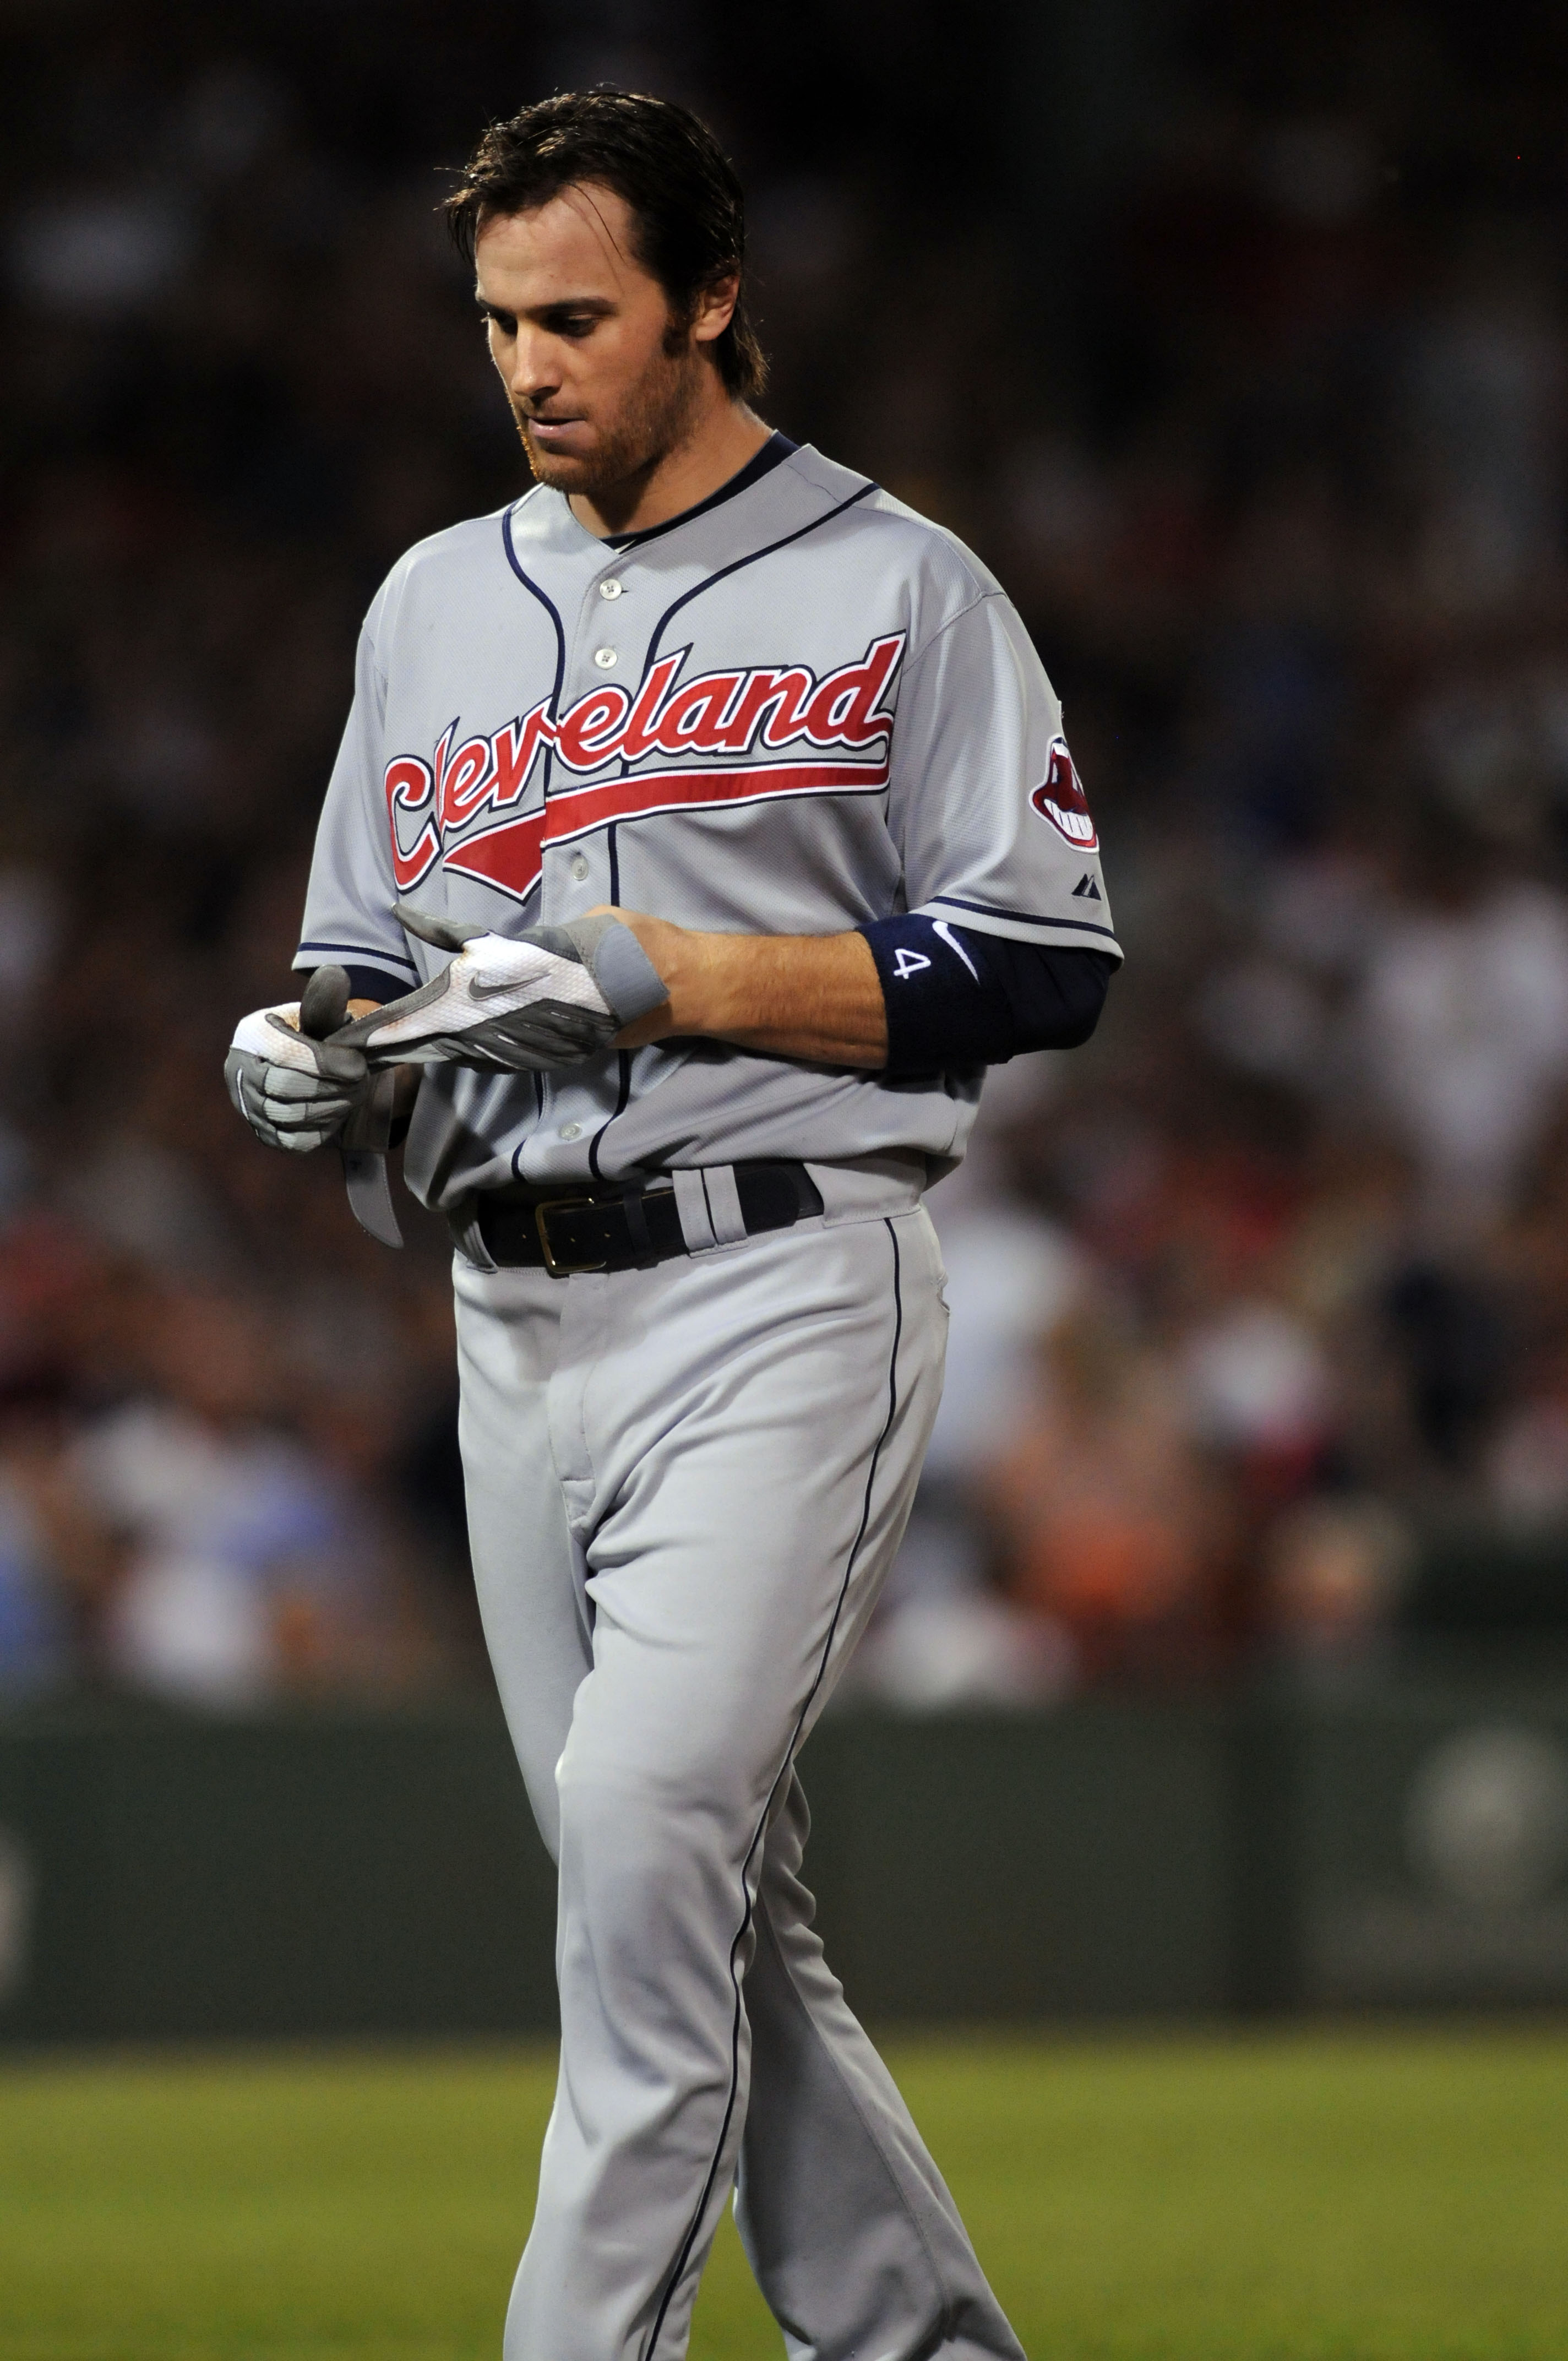 BOSTON, MA - AUGUST 5:  Trevor Crowe #4 of the Cleveland Indians walks off after grounding out against the Boston Red Sox August 5, 2010 at Fenway Park in Boston, Massachusetts. (Photo by Darren McCollester/Getty Images)